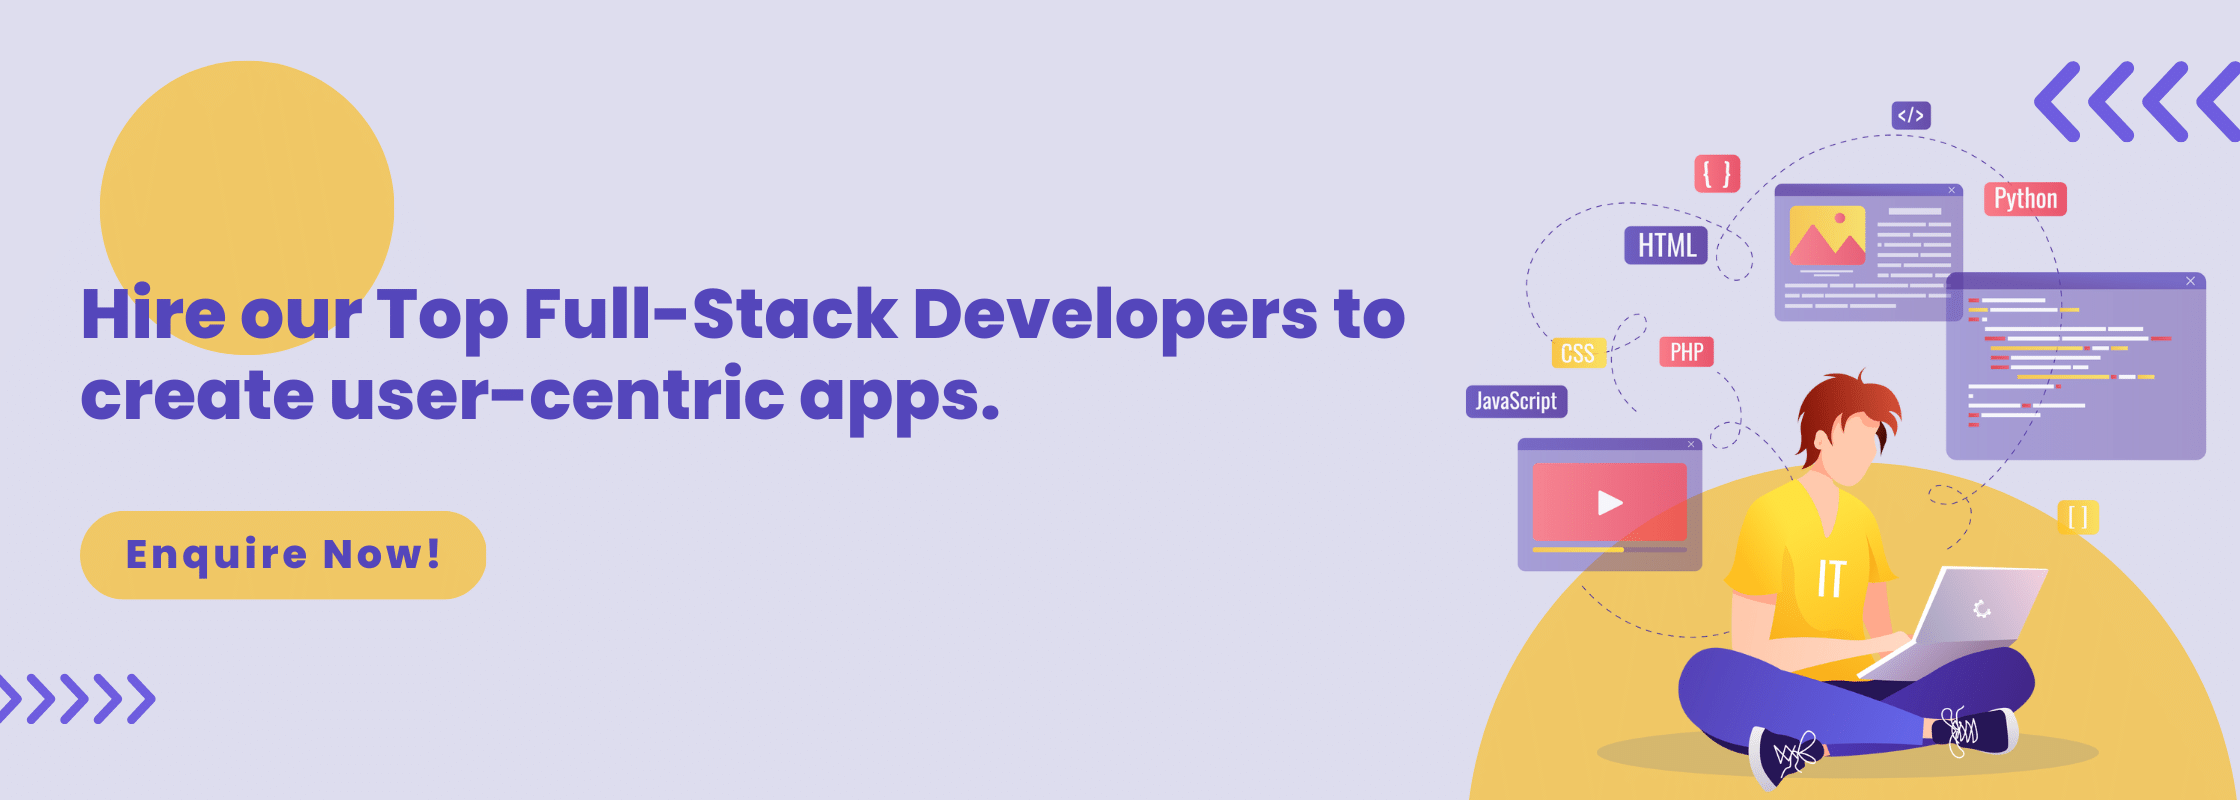 Hire Top Full Stack Developers